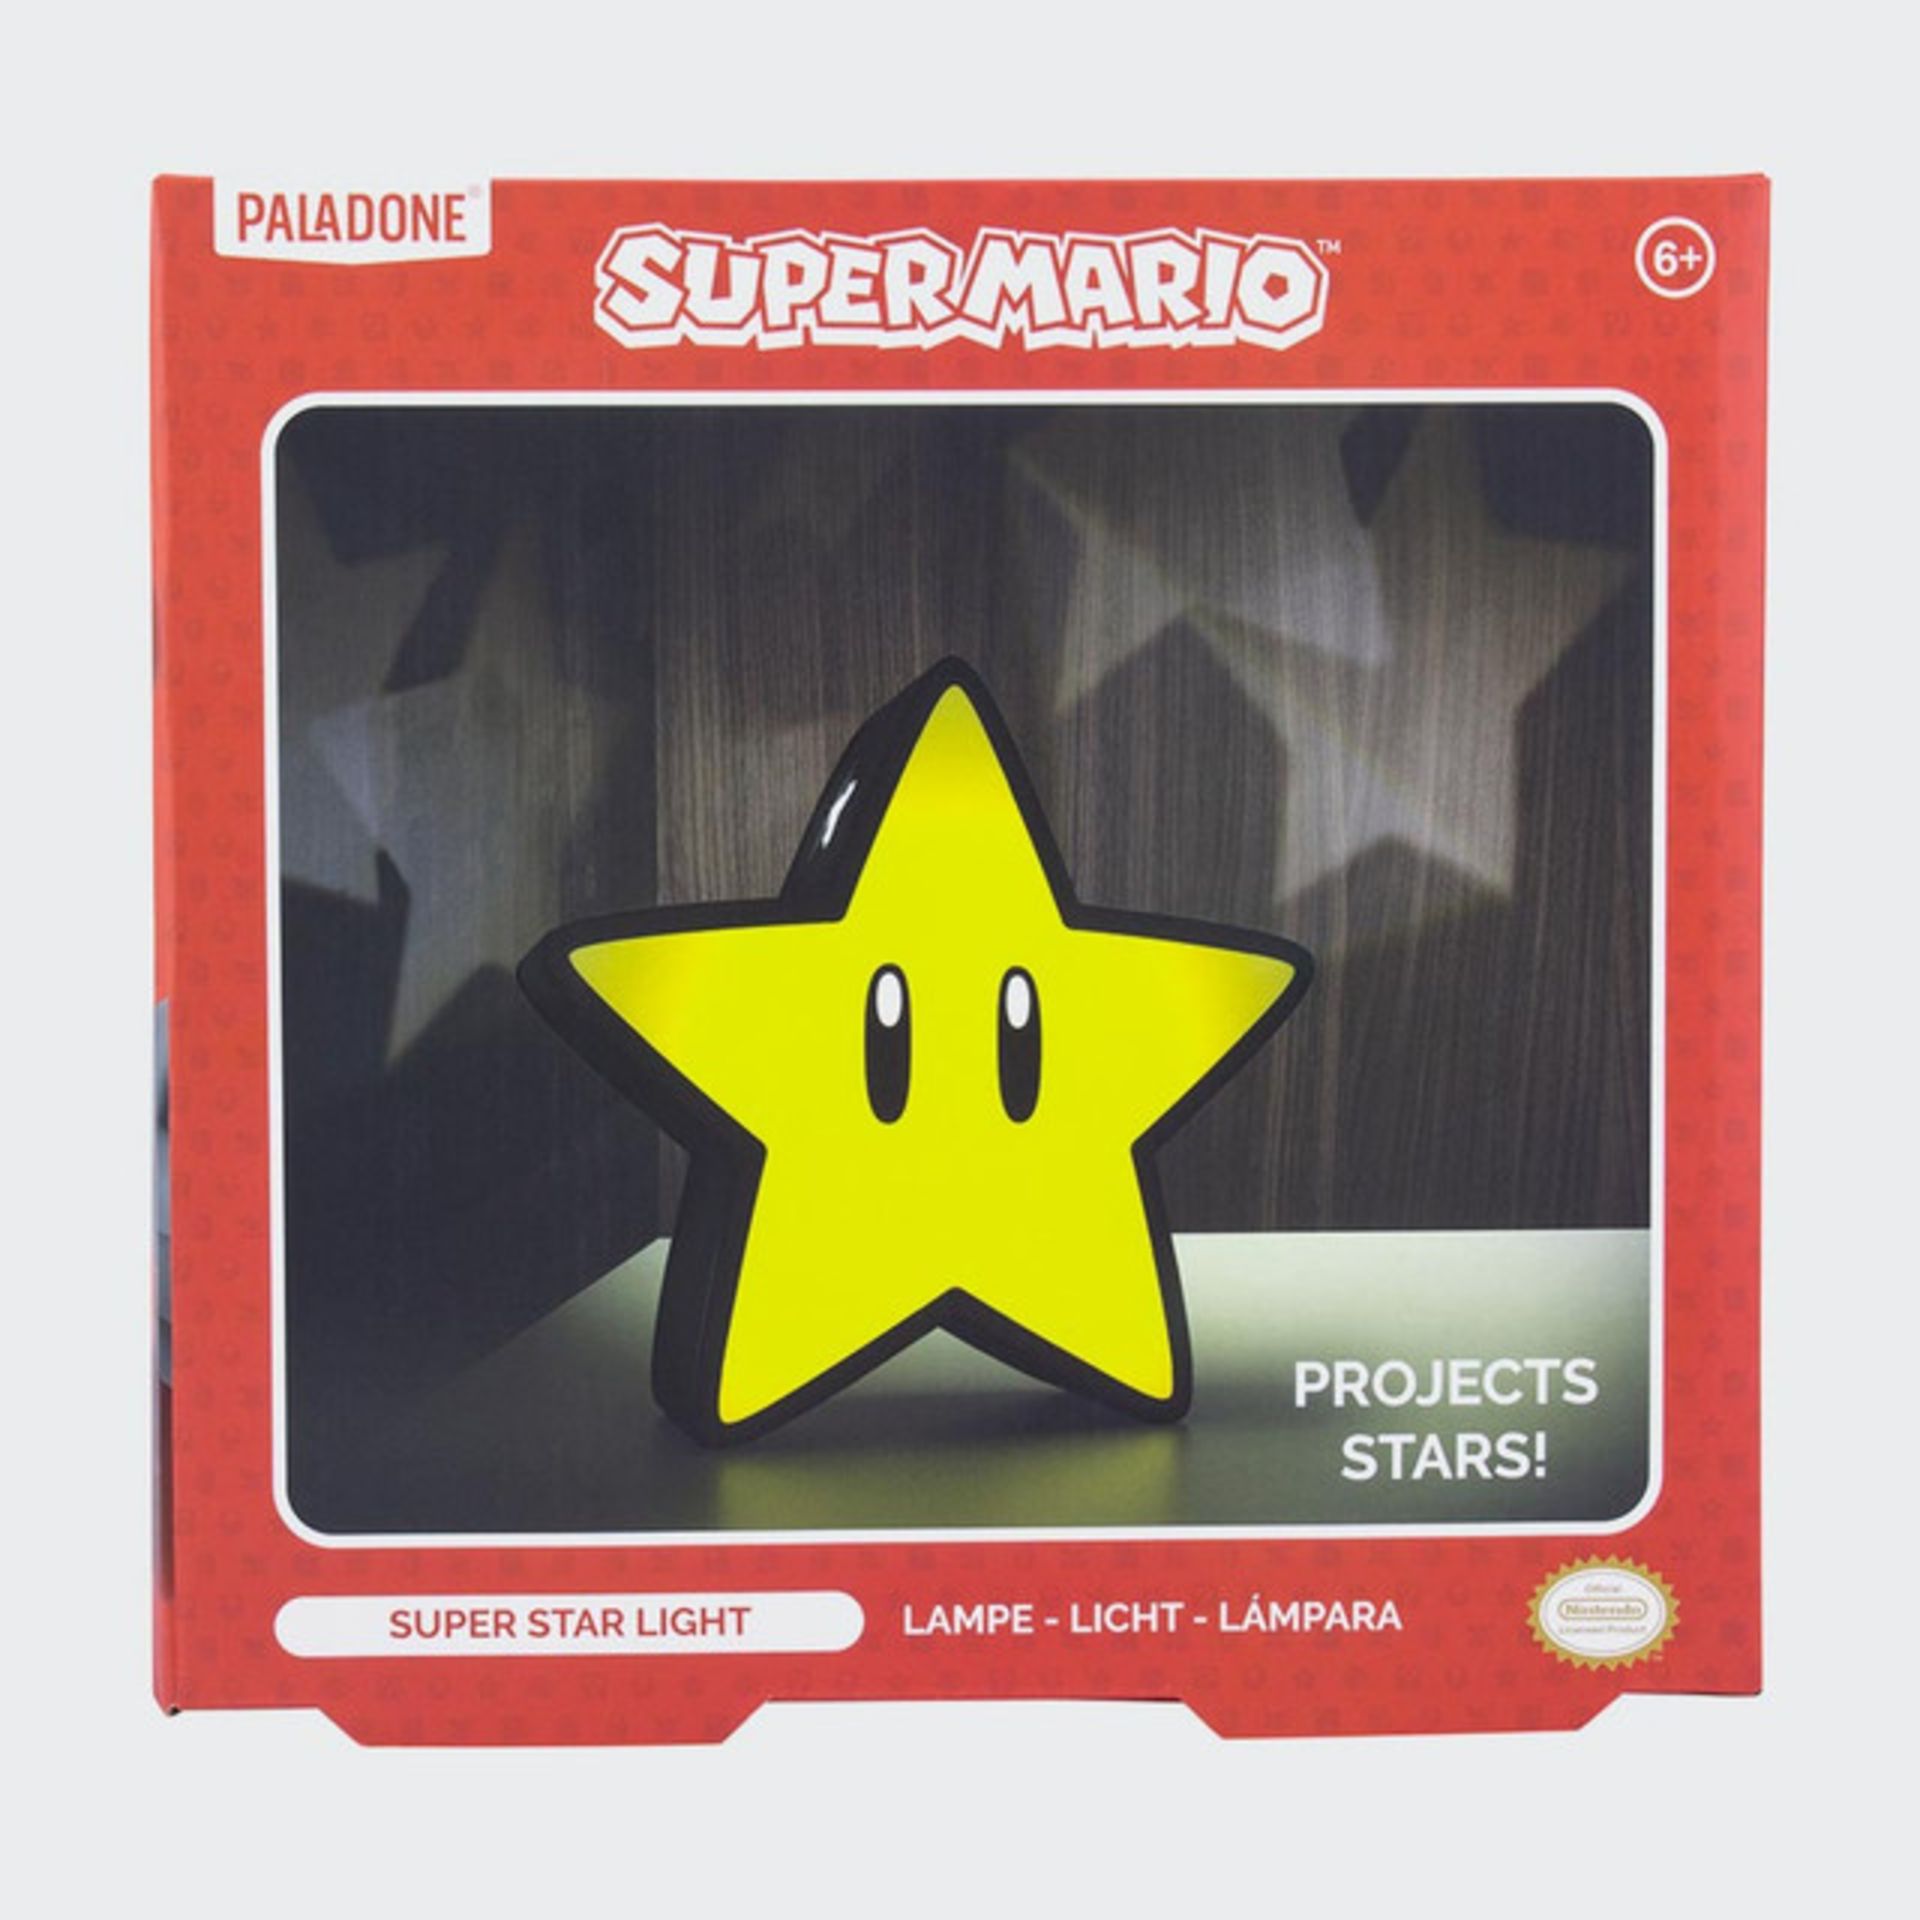 Title: (98/11C) Lot RRP £1506x Paladone Super Mario Super Star Light With Projection RRP £25